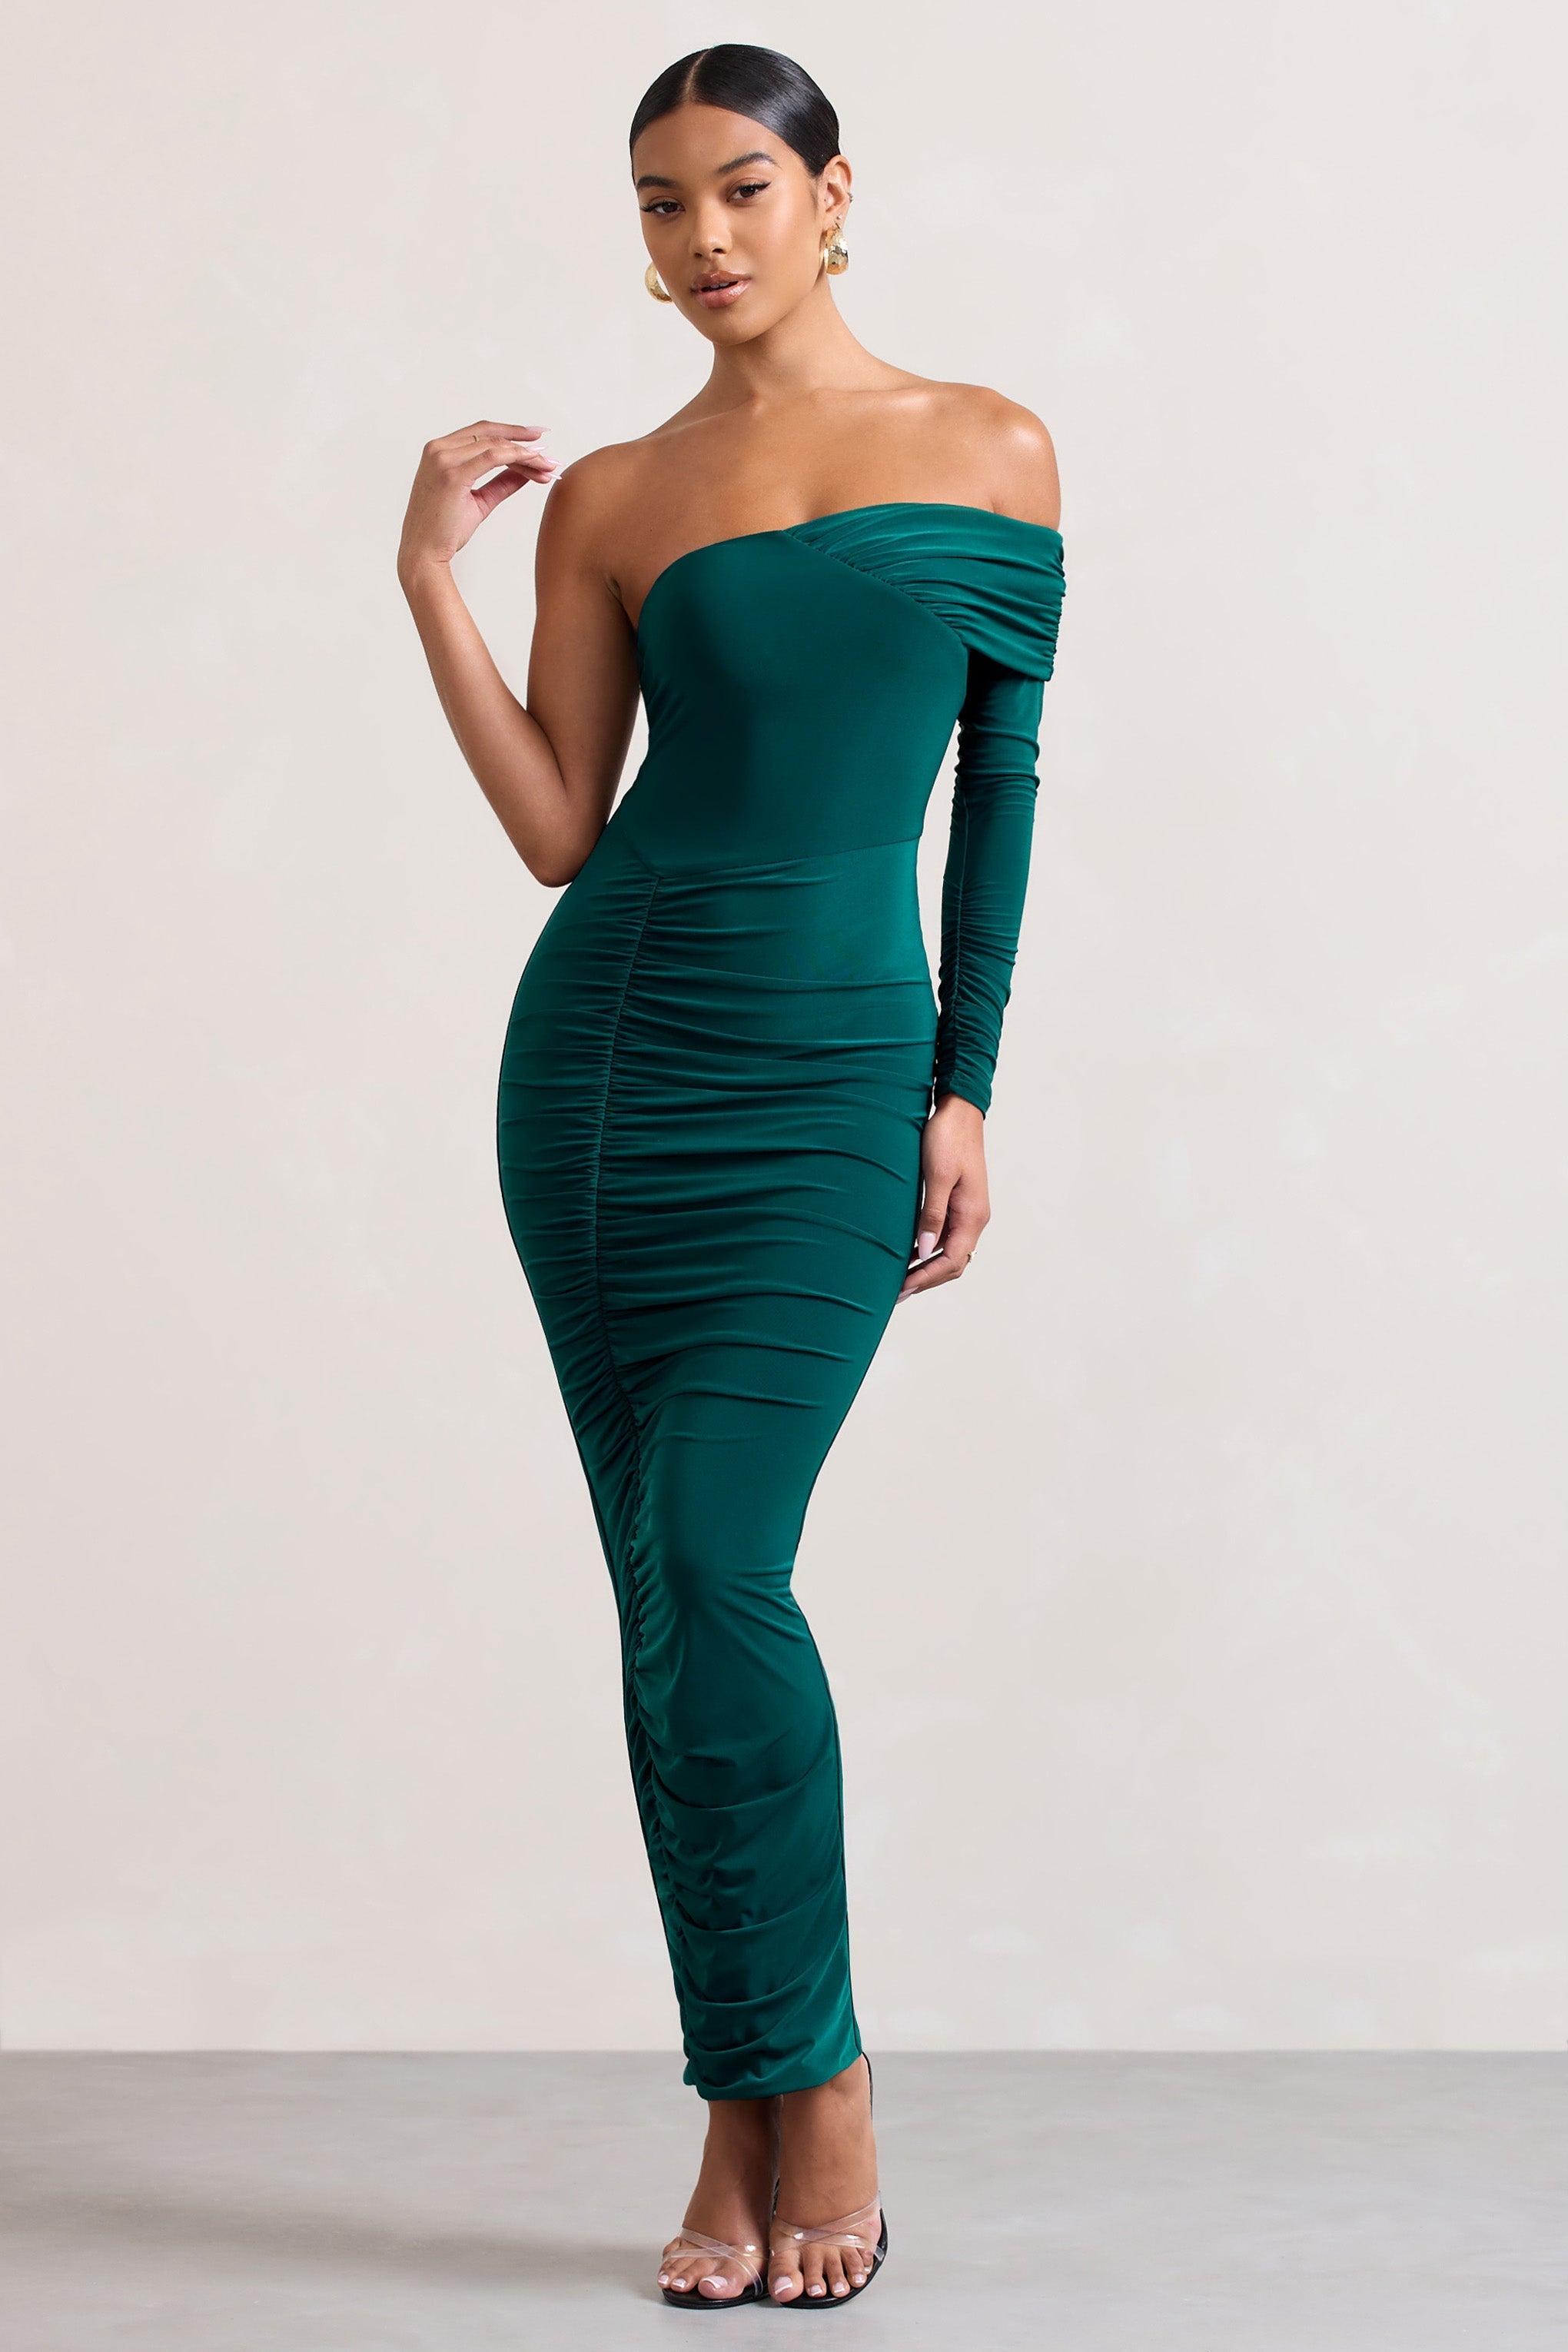 Afterparty Bottle Green Ruched Asymmetric Bodycon Maxi Dress